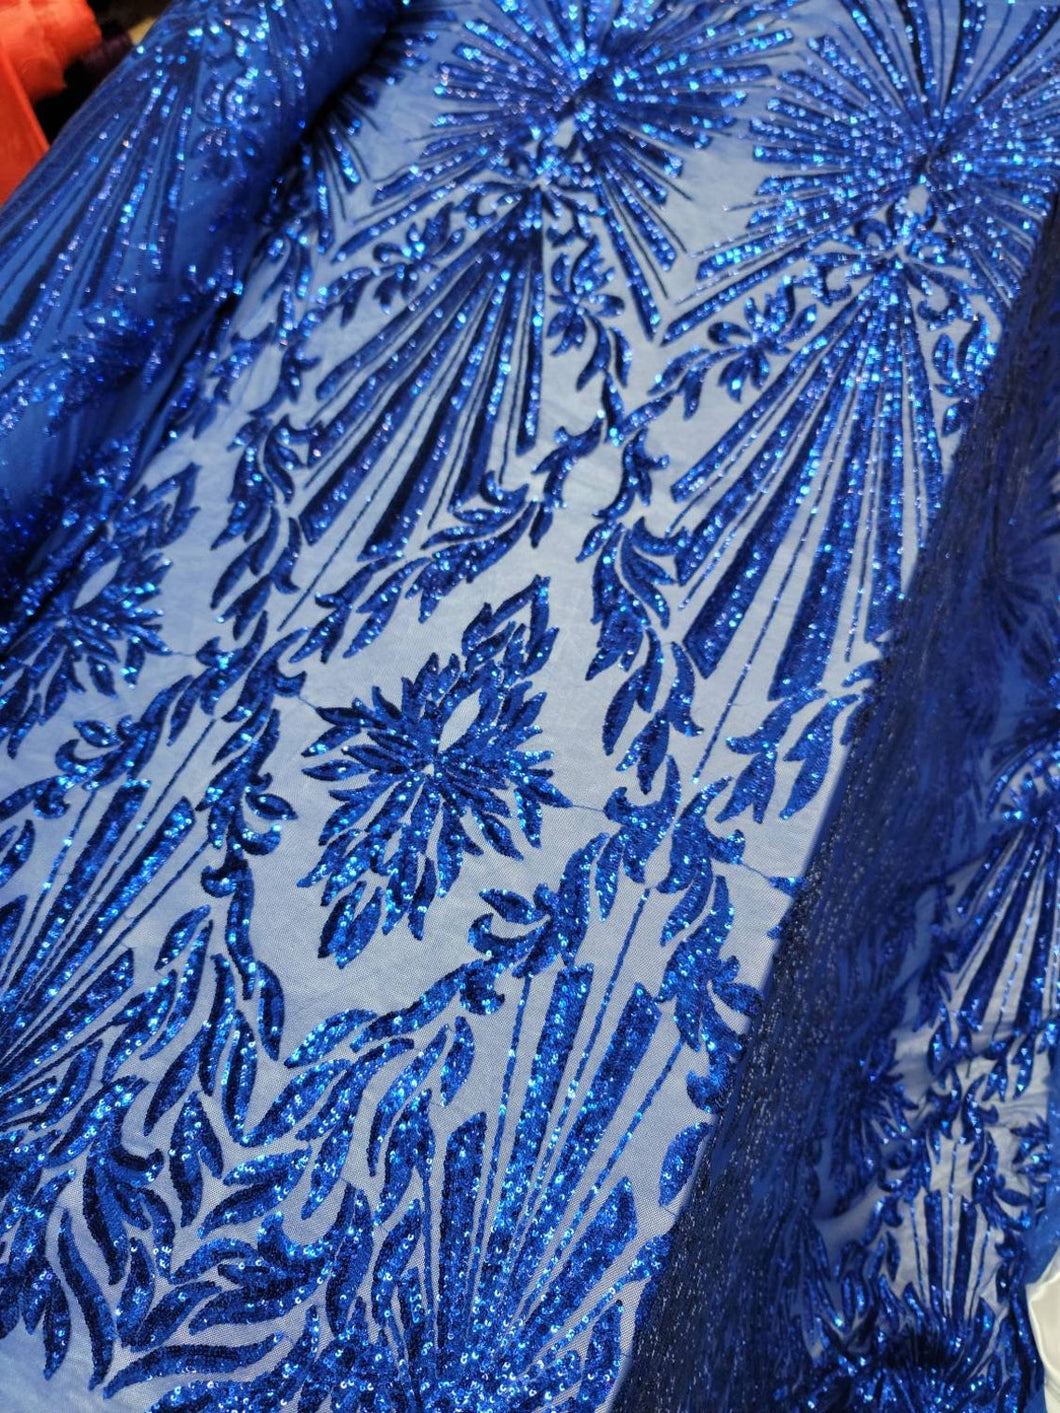 Royal Blue Sequin Fabric by the Yard/ Sequin Stretch Velvet Fabric/  Embroidered Lace Fabric / Blue Spandex Velvet Fabric With Sequin 